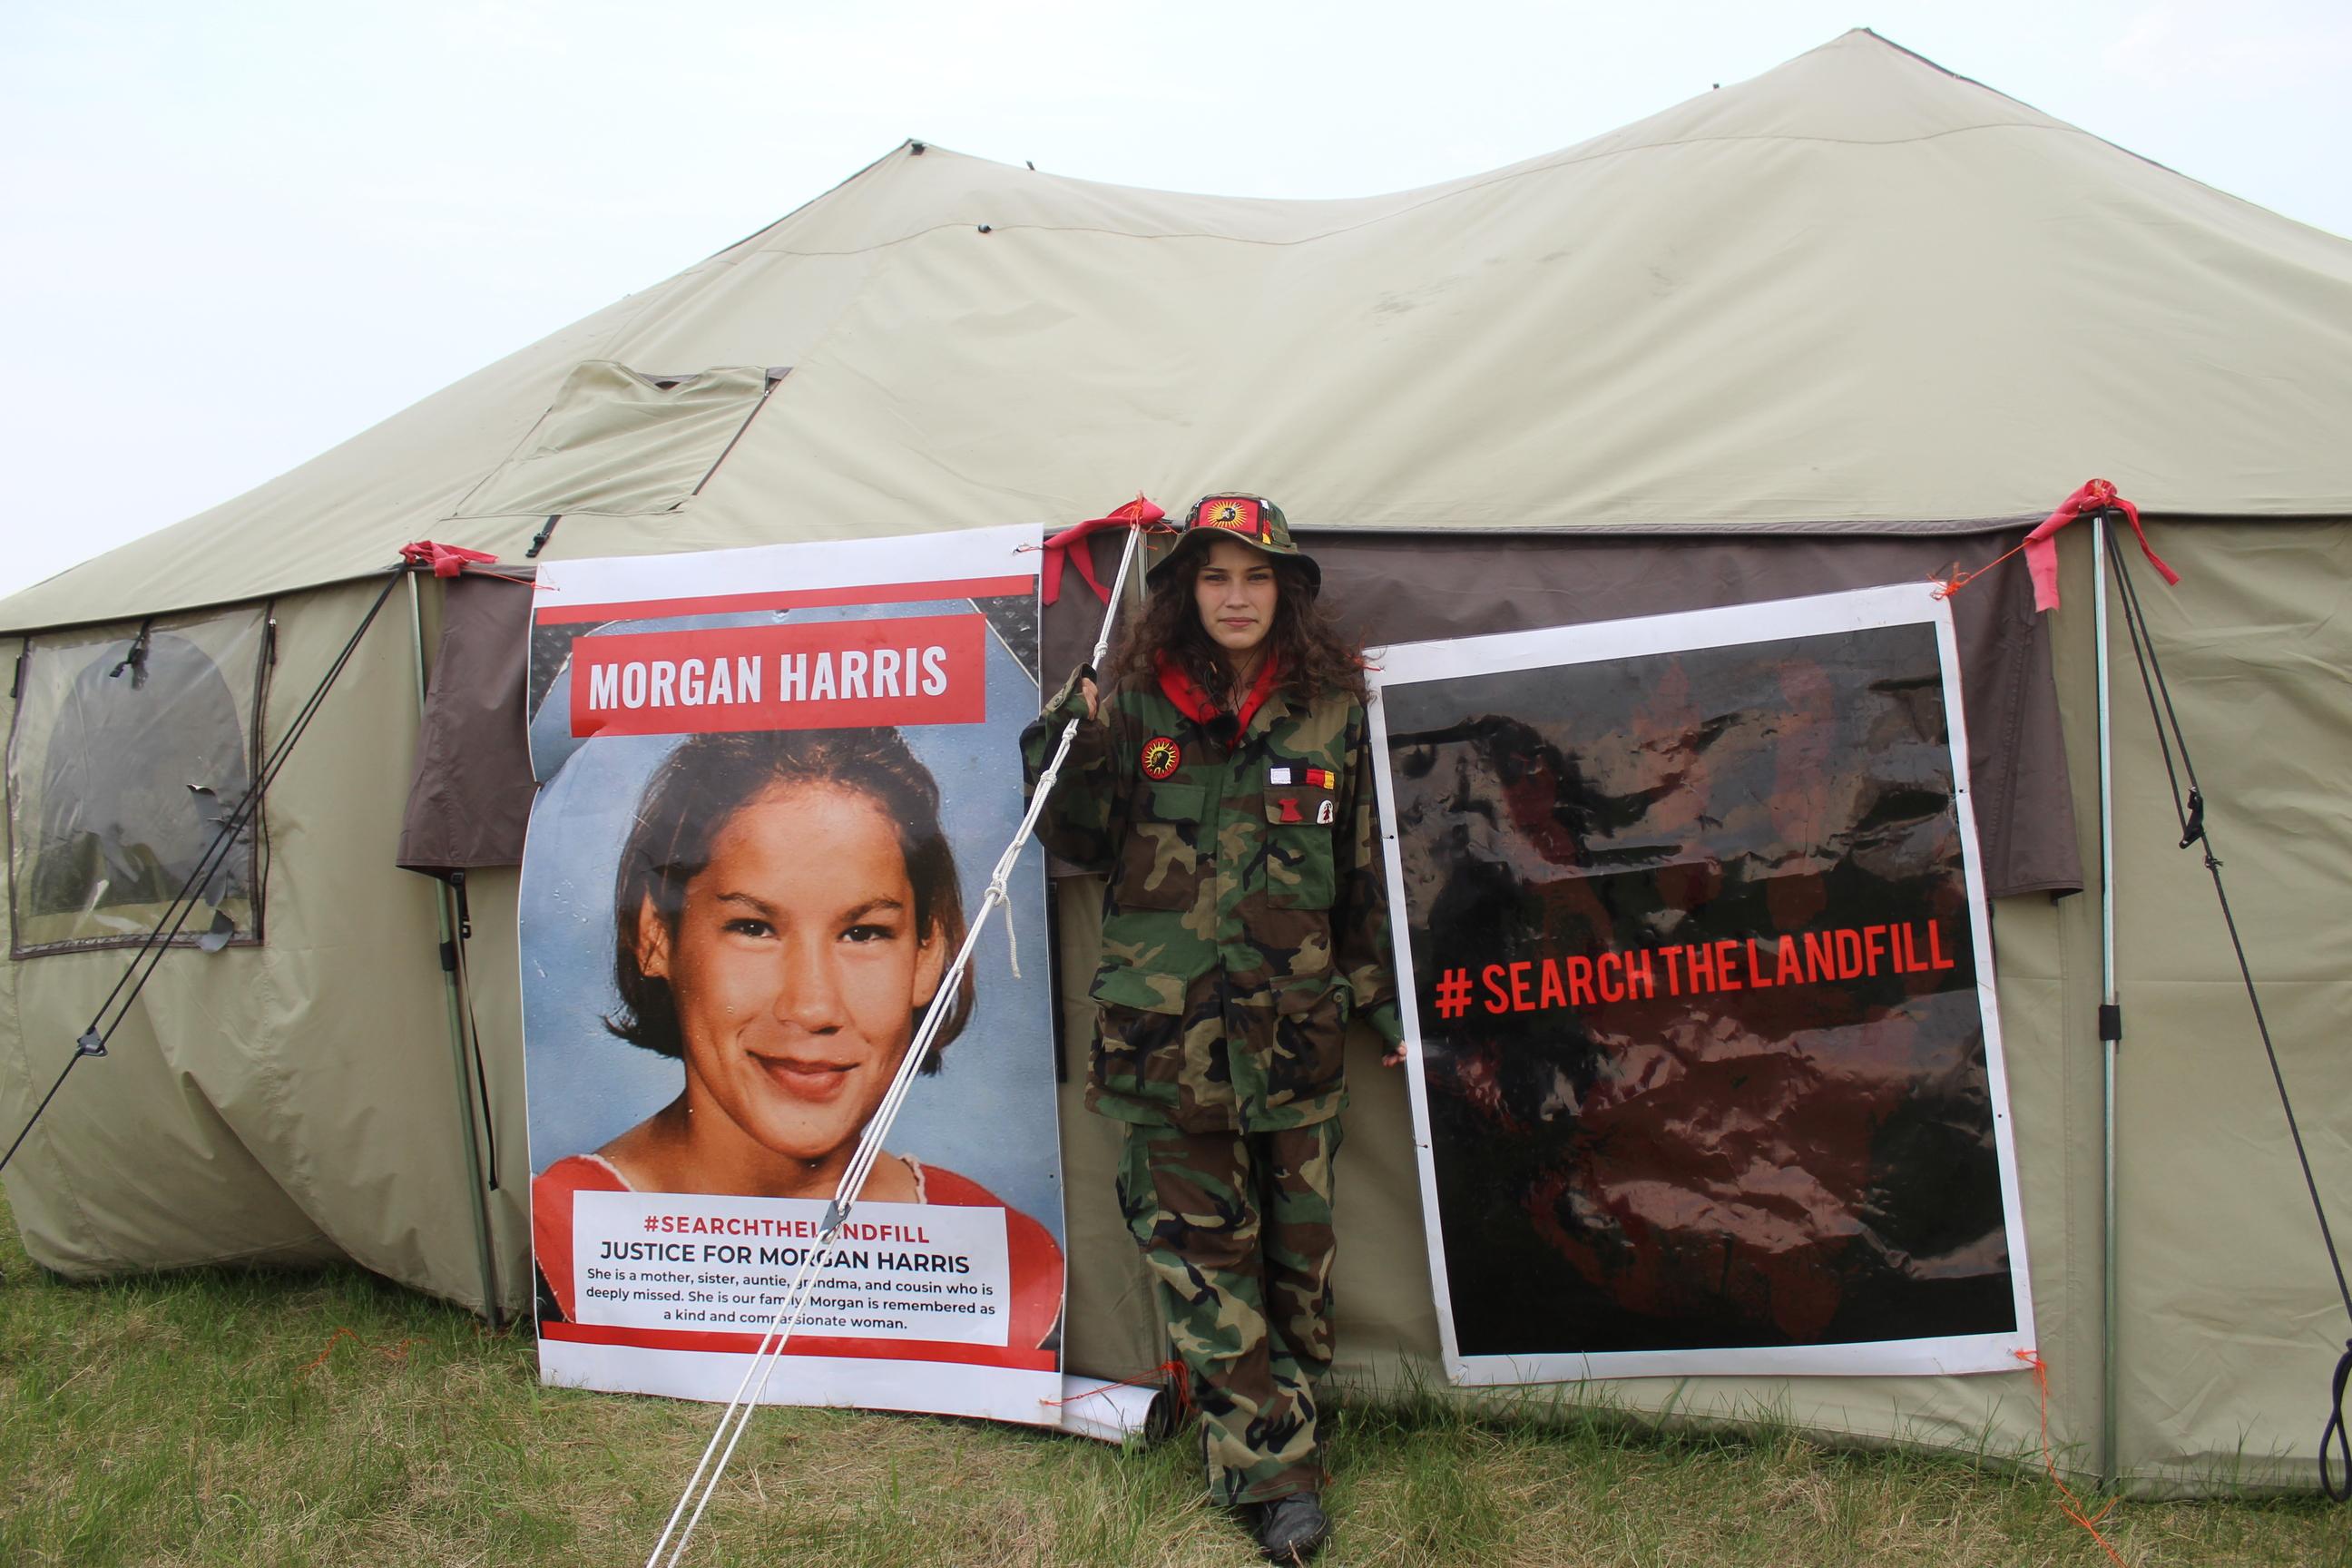 Cambria Harris in front of a tent with signs calling for the search for the body of her mother, Morgan Harris.